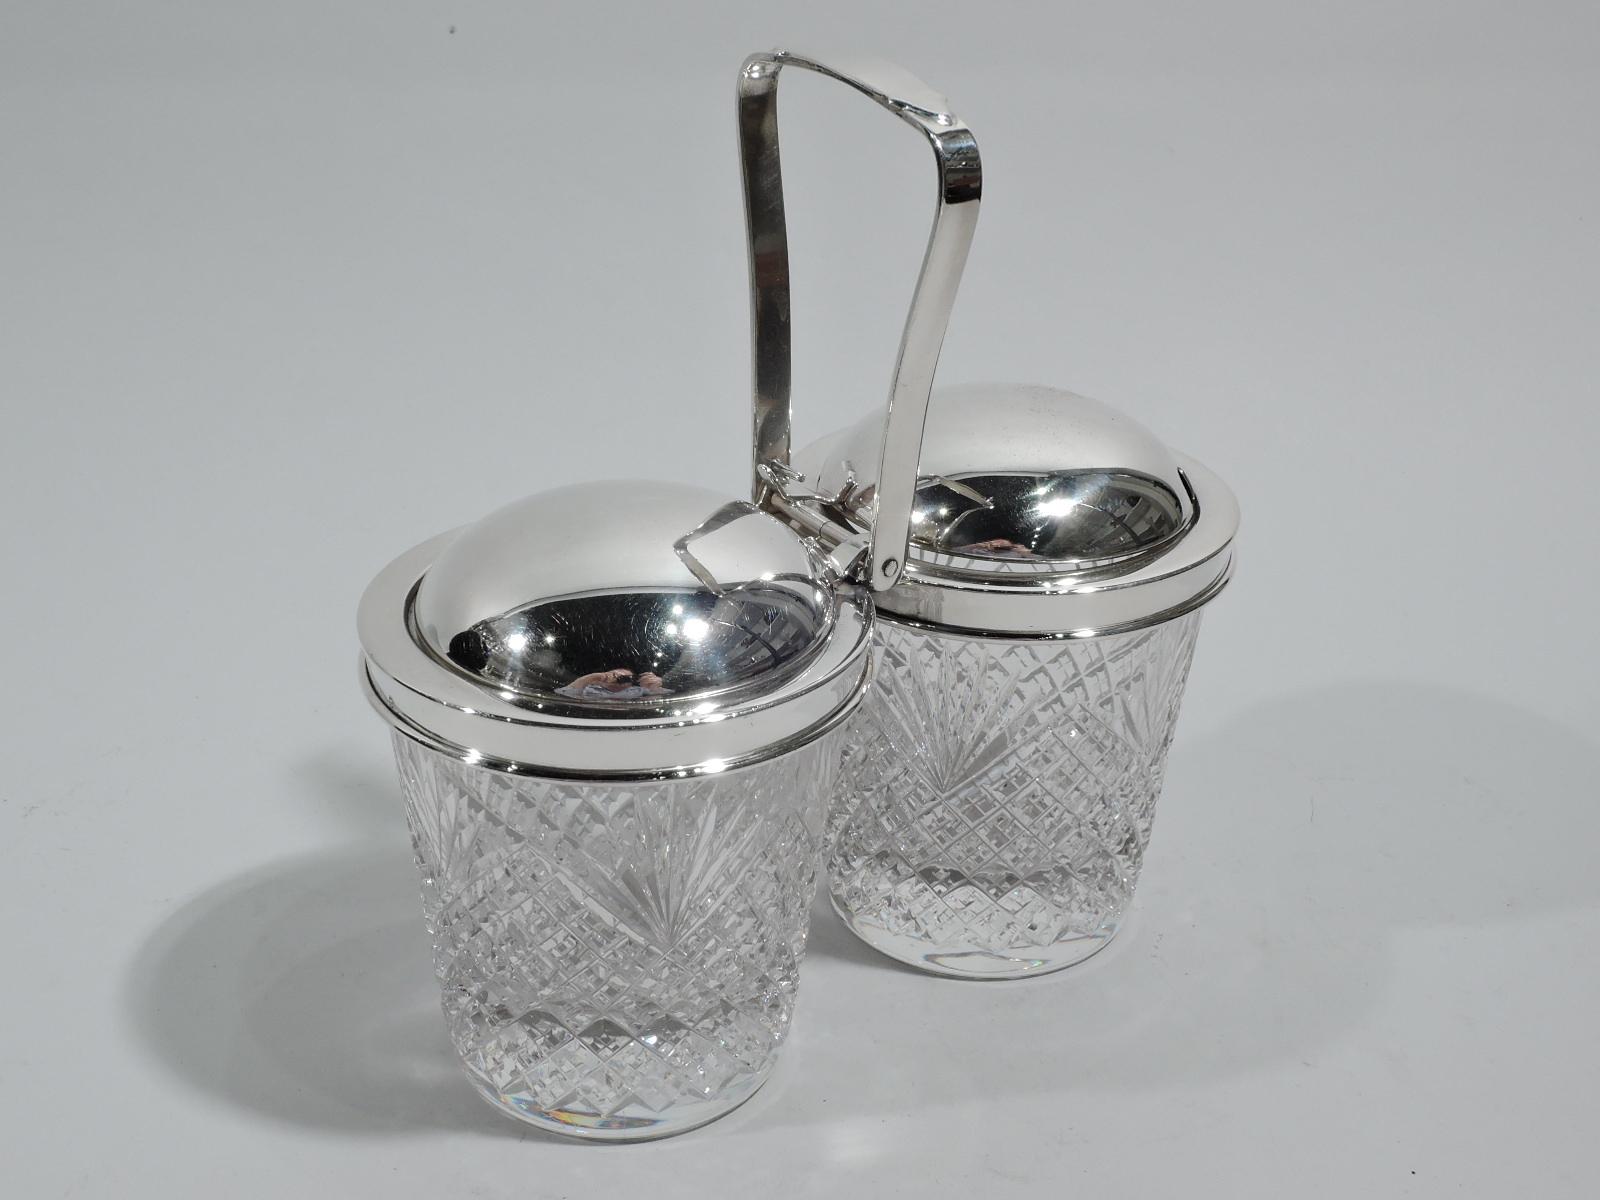 Old-fashioned sterling silver and glass double jam jar, ca 1950. Retailed by Tiffany & Co. in New York, ca 1950. Two jars, each with straight and tapering sides and raised diaper and fern pattern. Sterling silver collars joined by mount with open